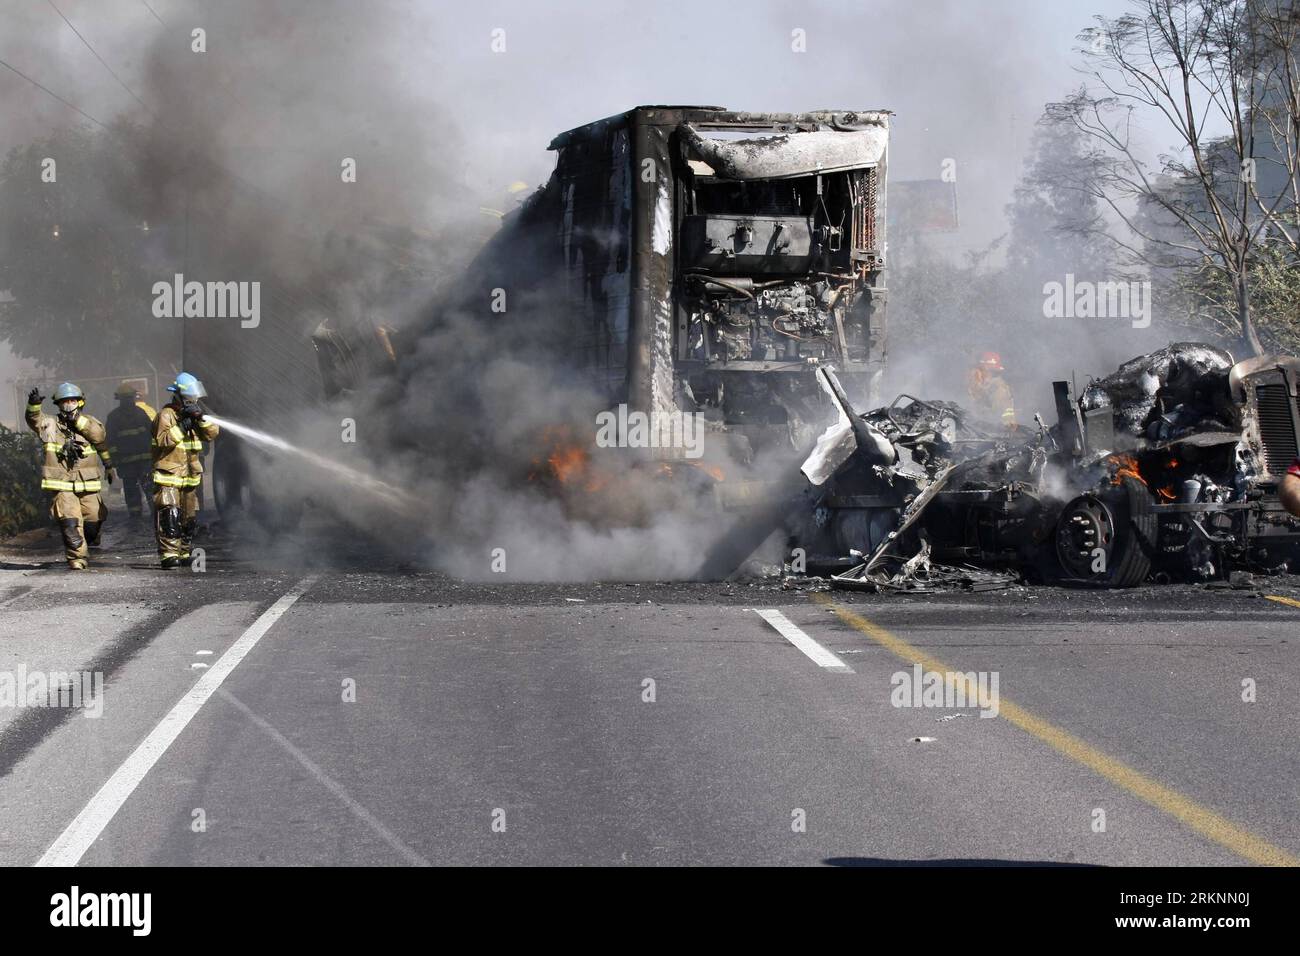 Bildnummer: 57330450  Datum: 09.03.2012  Copyright: imago/Xinhua (120310) -- GUADALAJARA, March 10, 2012 (Xinhua) -- Fire fighters try to extinguish a burning tractor trailer used as a roadblock during a series of clashes between authorities and the organized crime, in the city of Guadalajara, Mexico, March 9, 2012. Around 16 places of the metropolitan area of Guadalajara were affected with burned vehicles causing roadblocks. According to the local press, an operation was conducted by elements of the Mexican Army against the cartel of Jalisco Nueva Generacion (Jalisco s New Generation), one of Stock Photo